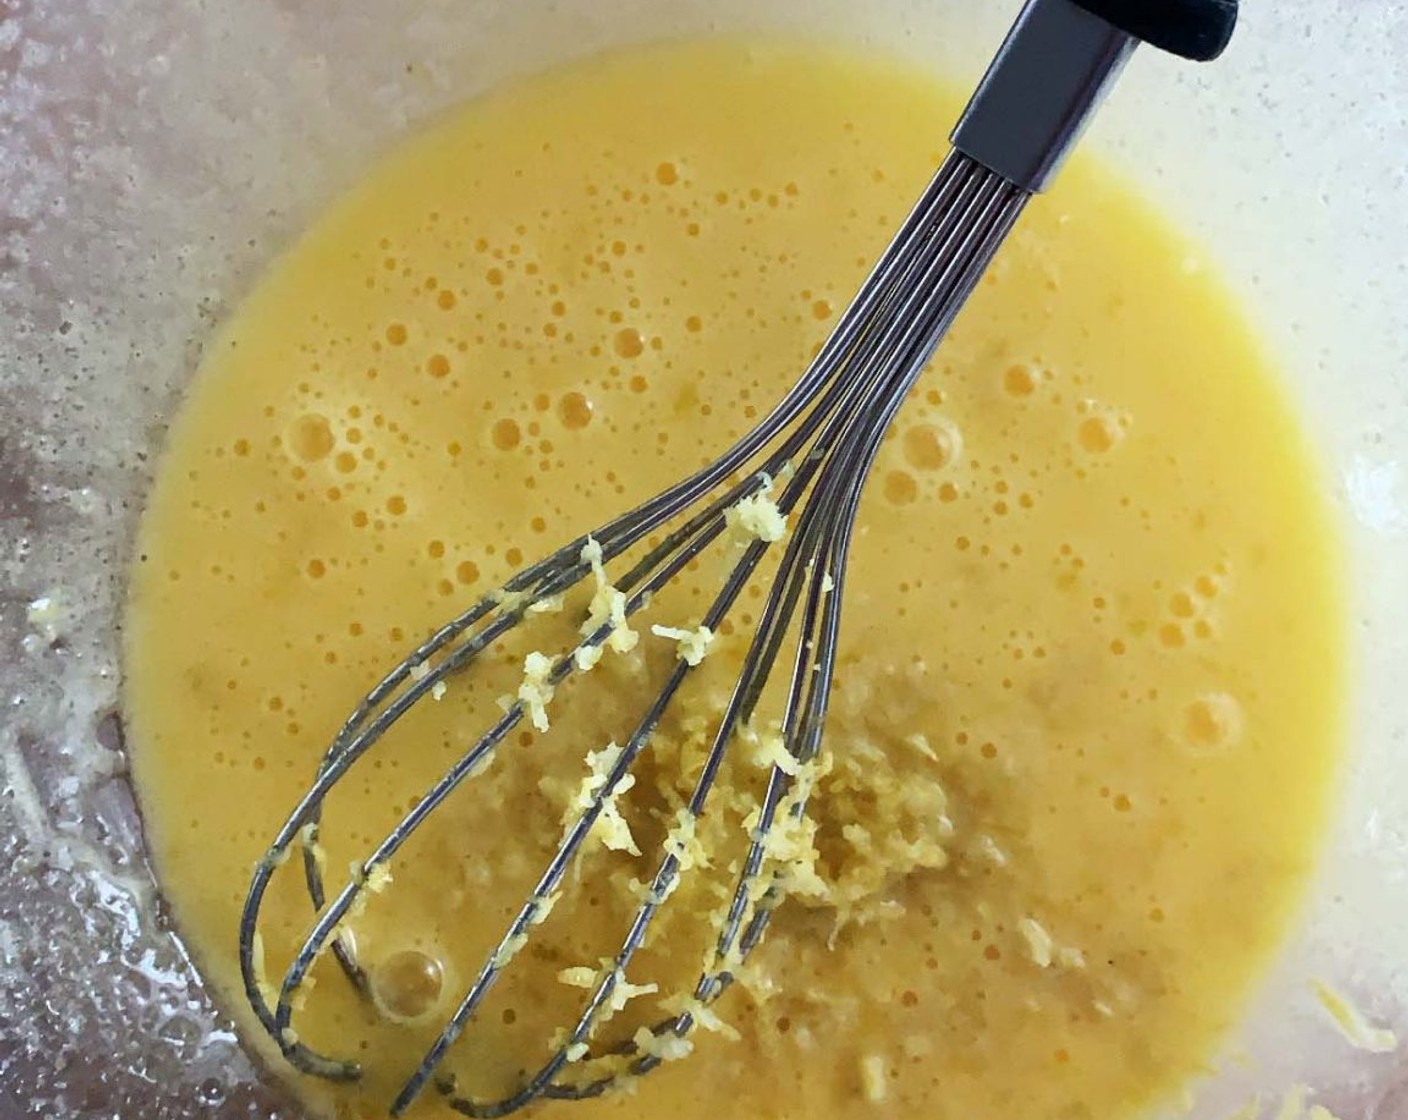 step 2 In a bowl whisk one whole Eggs (2) and one egg yolk, Granulated Erythritol (1/2 cup), and Light Extra-Virgin Olive Oil (3 oz). Add in the Lemon (1/2).